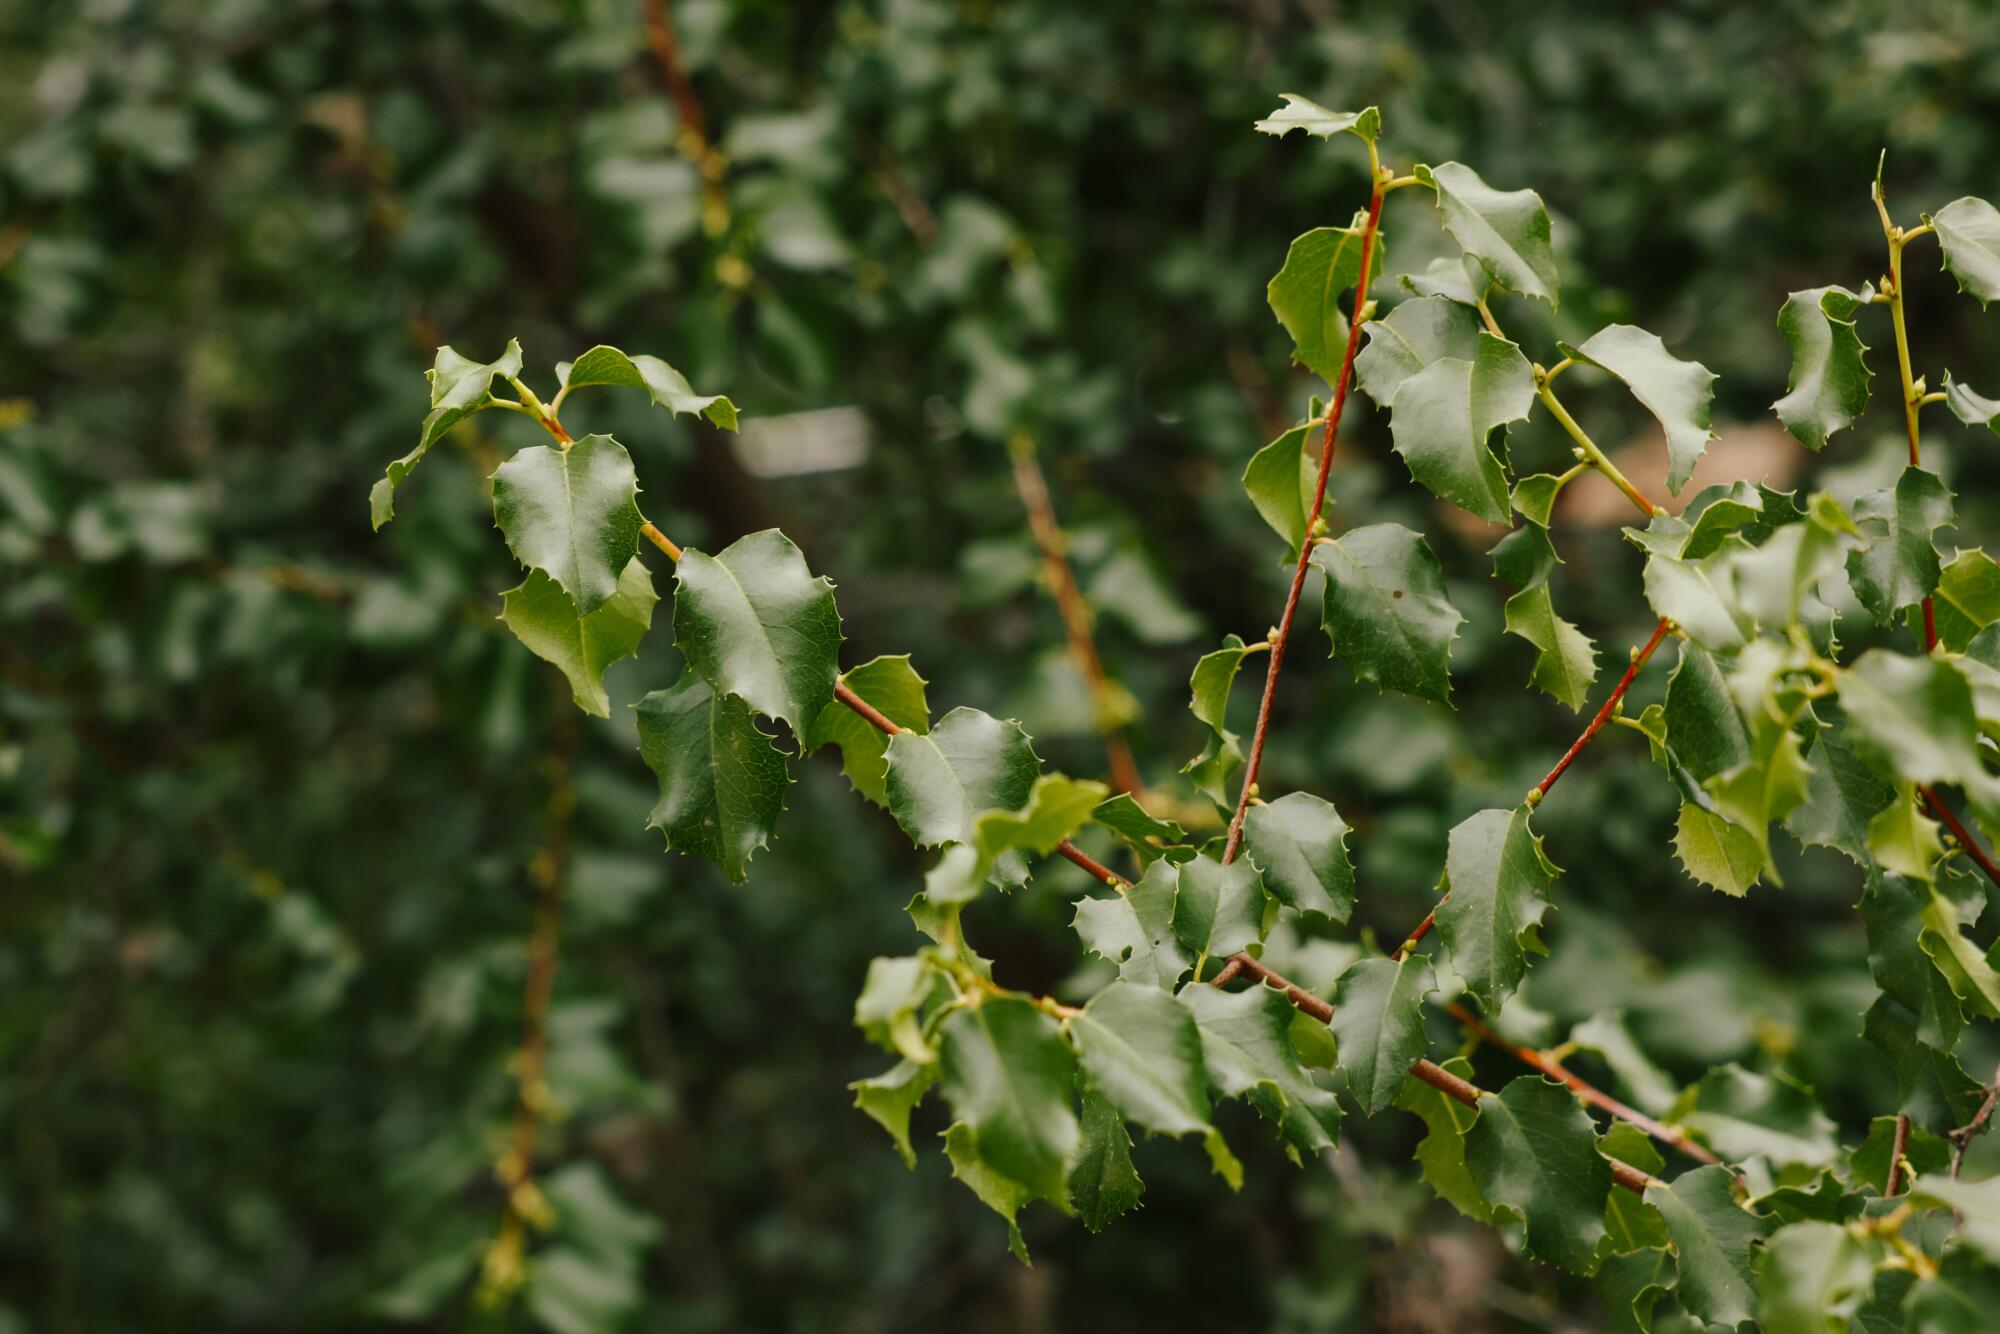 Hollyleaf cherry has glossy green, serrated leaves 